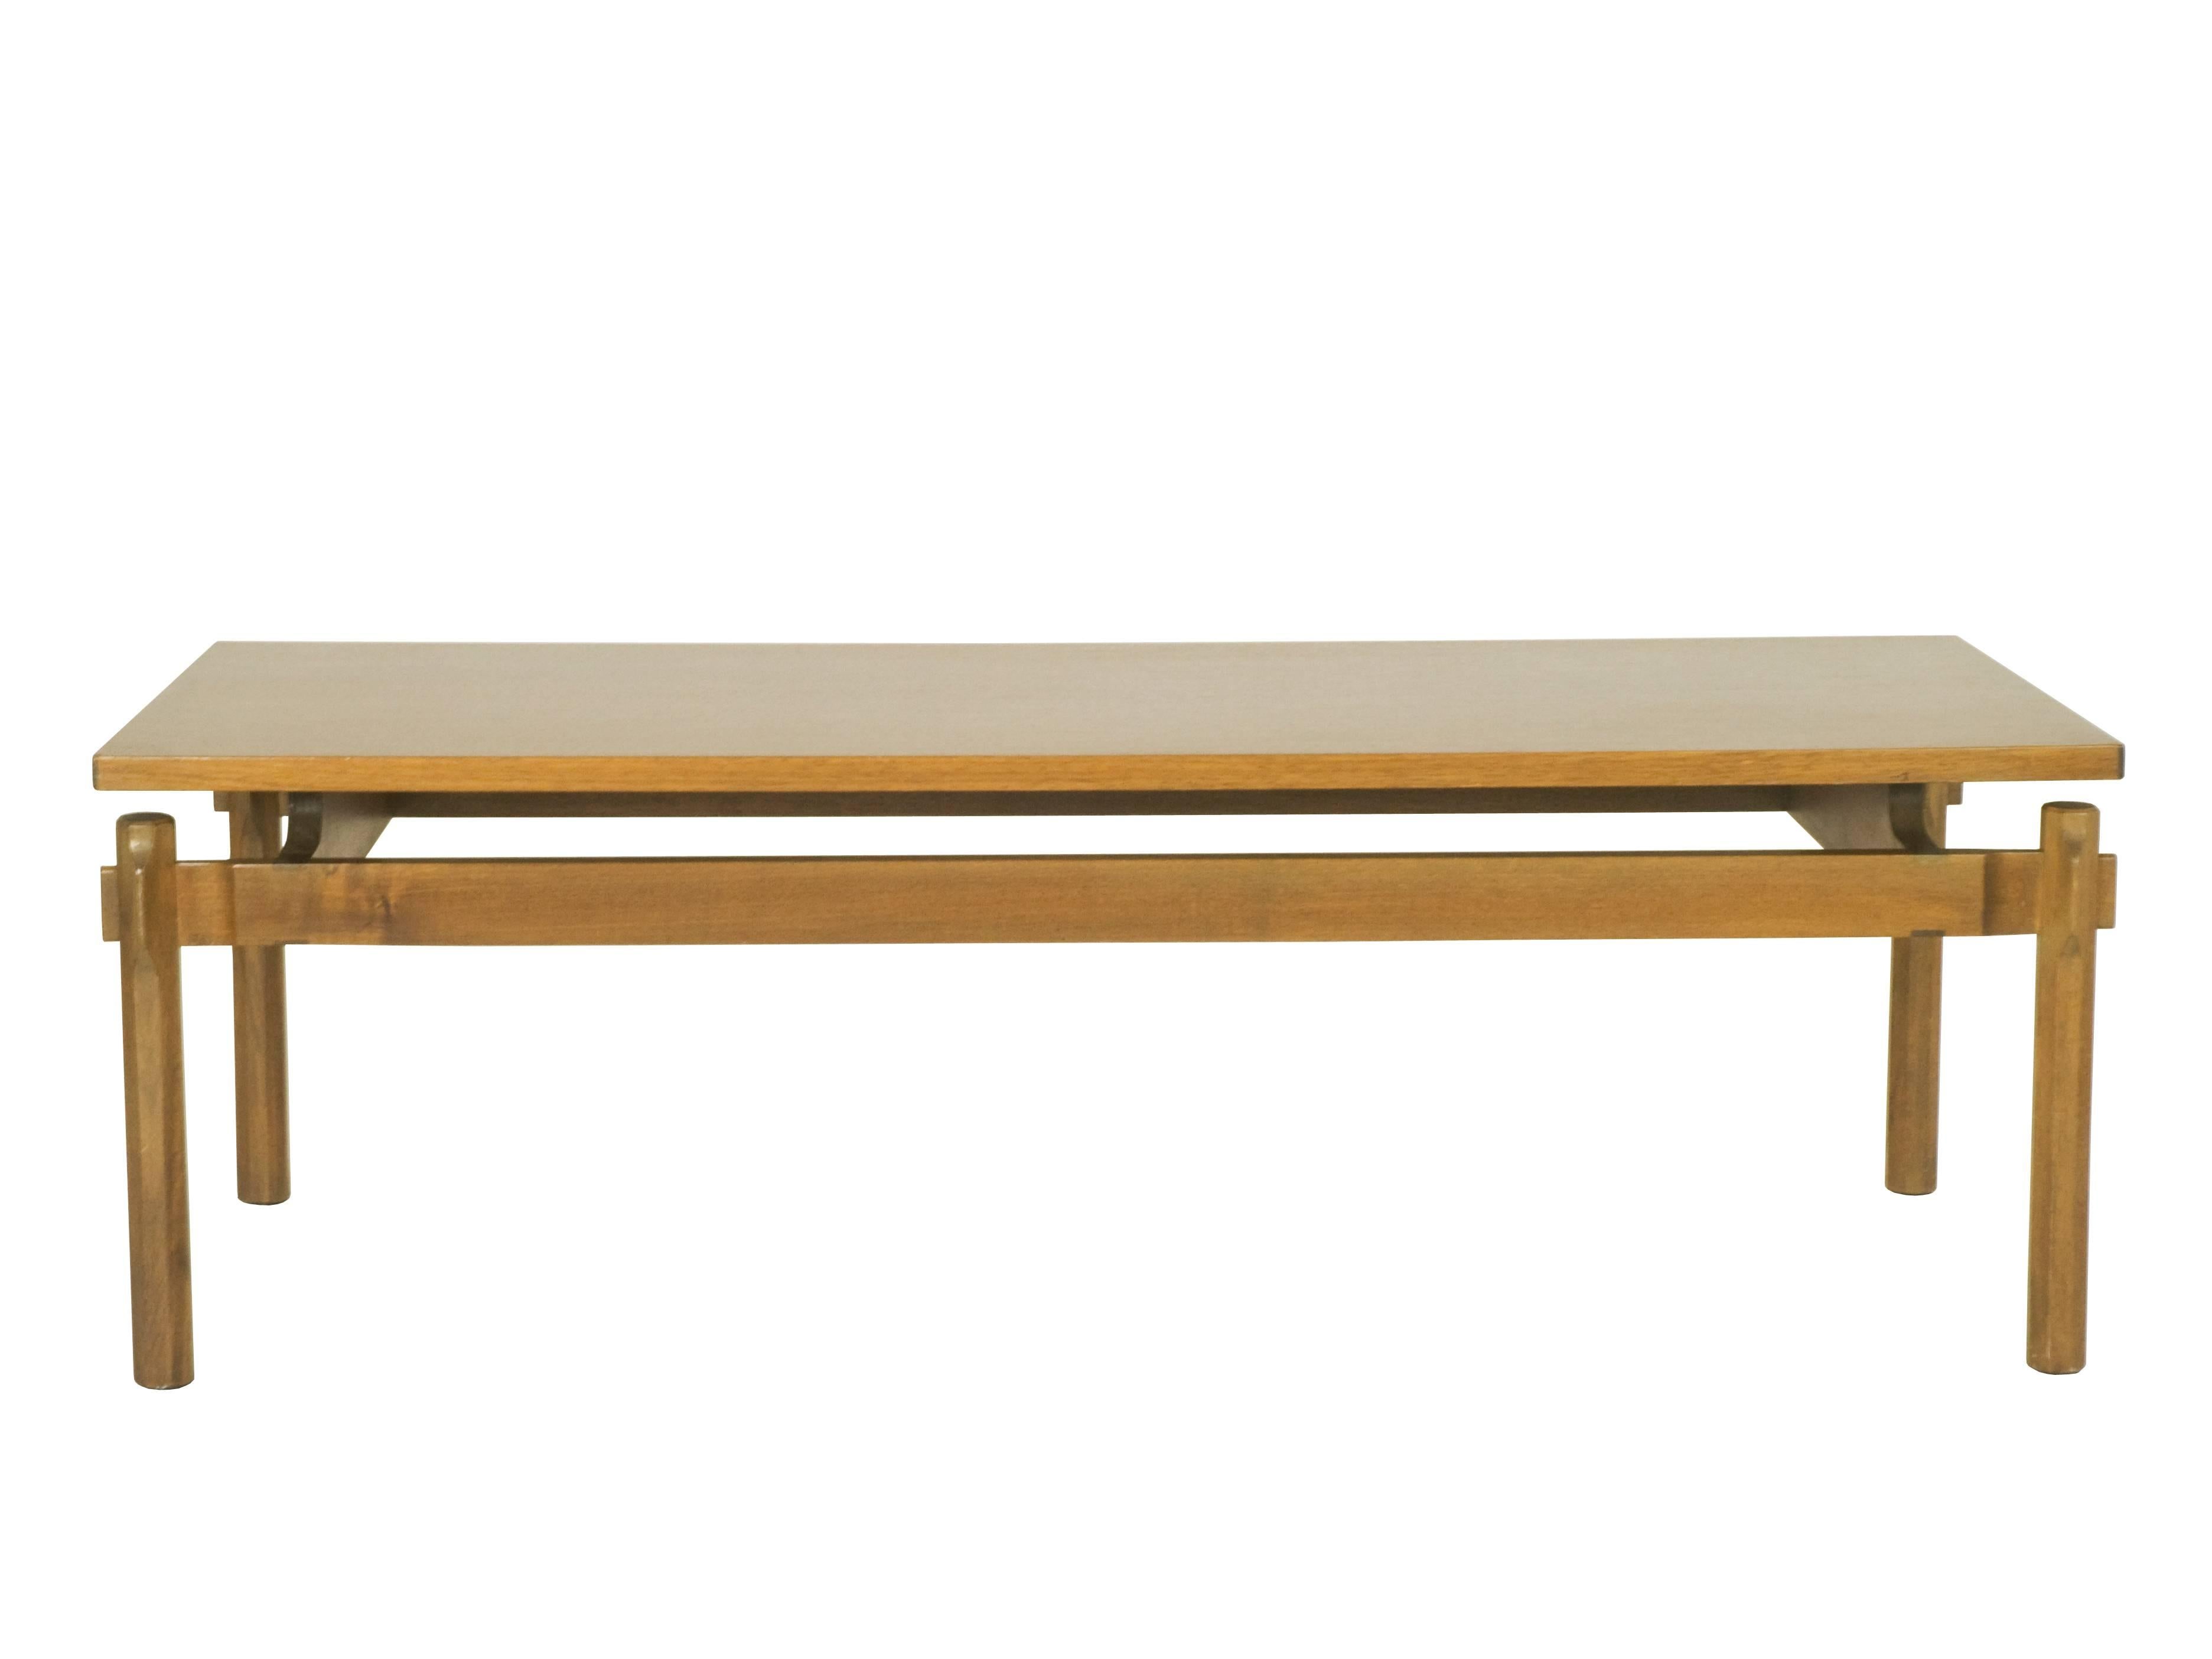 Rare walnut coffee table designed by Ico Parisi and produced by Cassina (Meda, Italy) in the 1960. The tabletop is separated from the legs by two of the four horizontal slats, the carved shape of which makes them taller than their counterparts. The